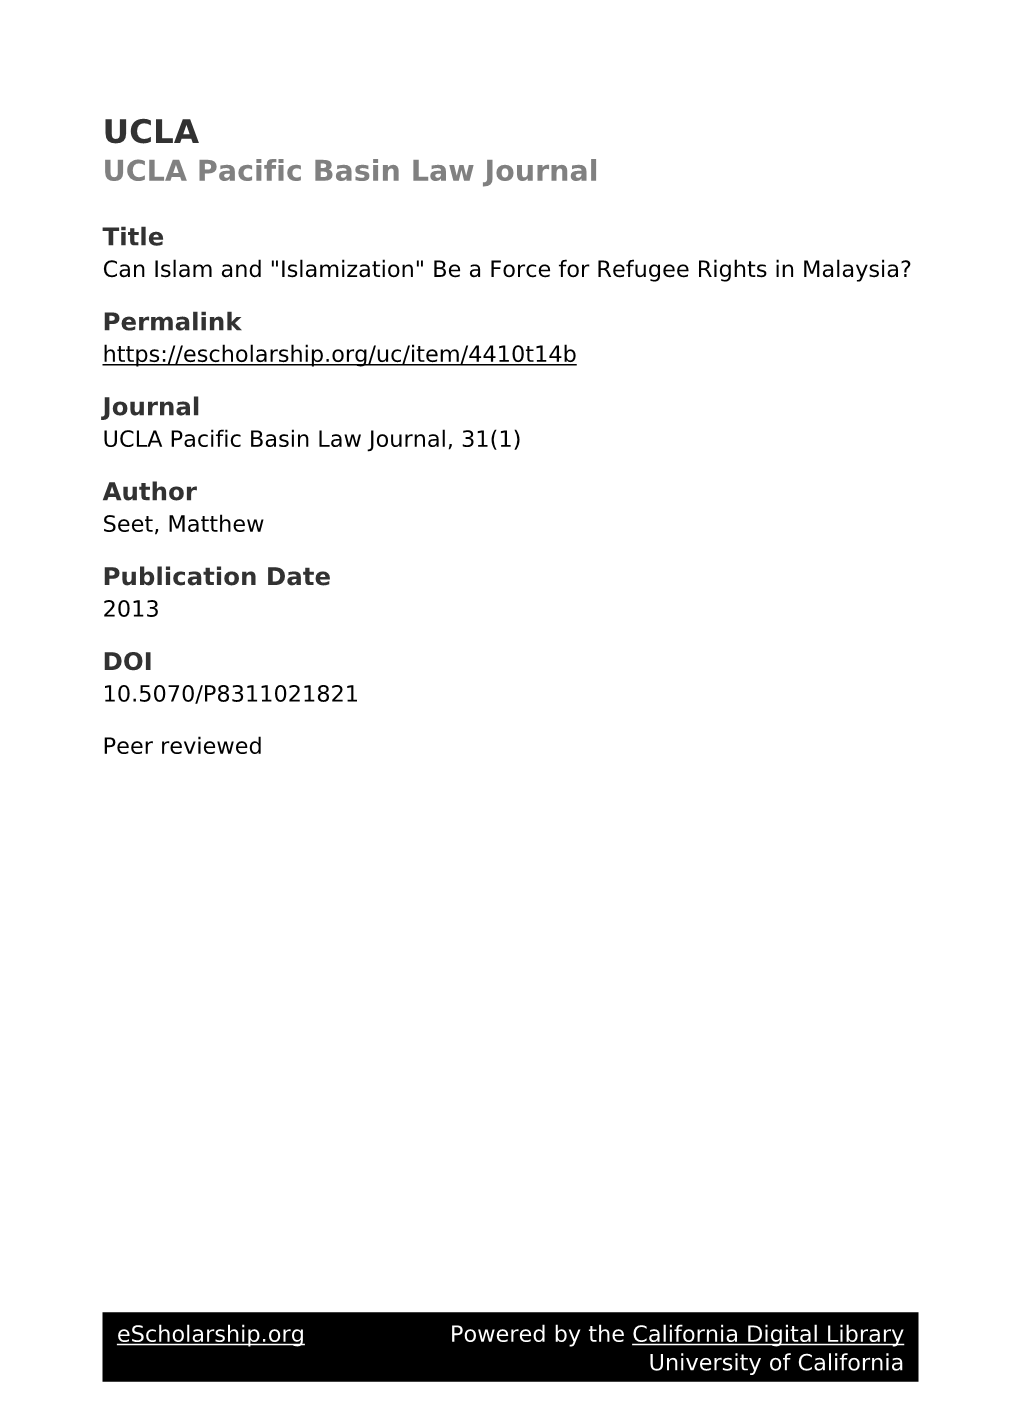 "Islamization" Be a Force for Refugee Rights in Malaysia?